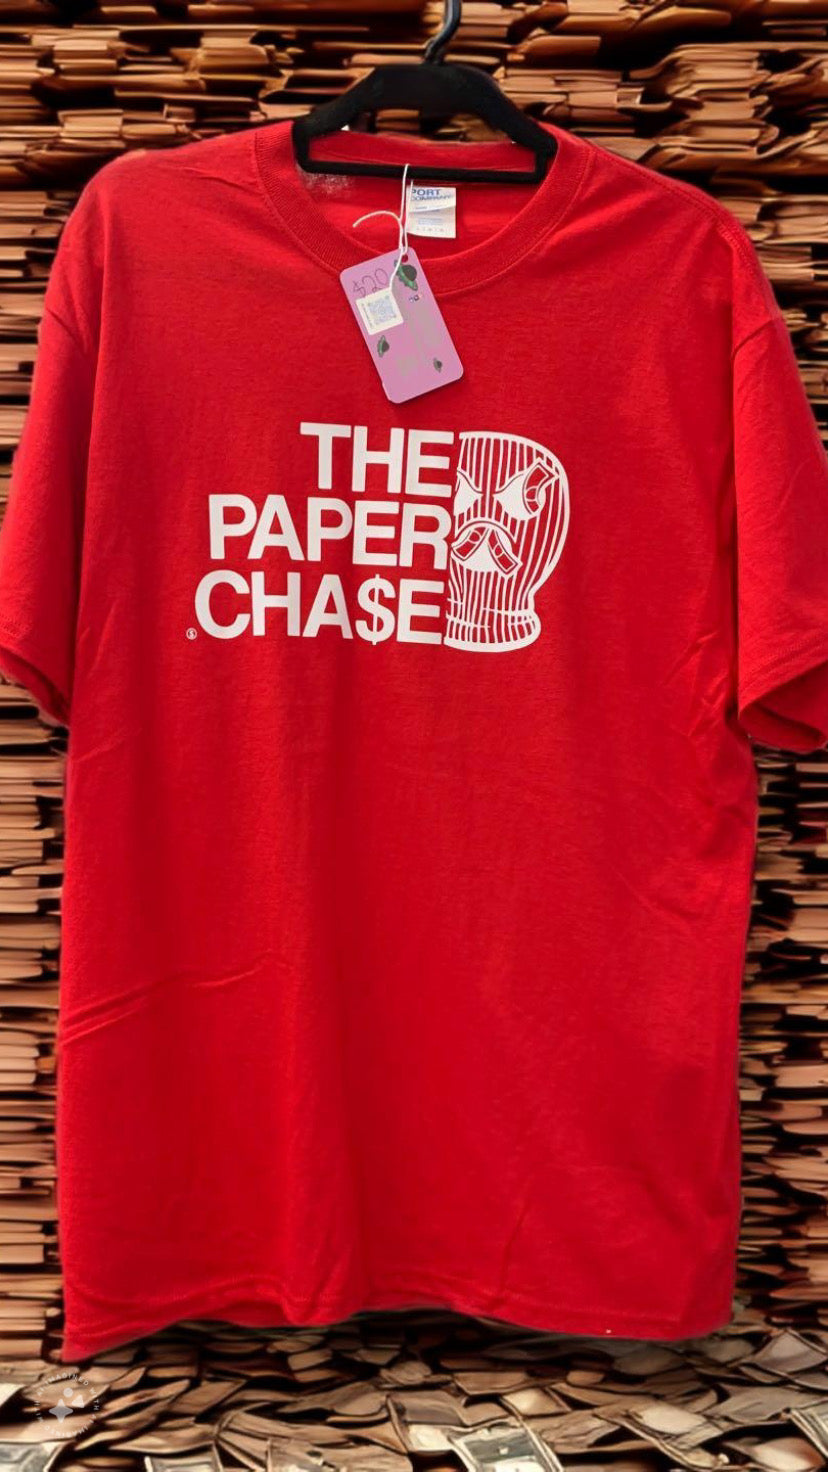 The Paper Chase Tee